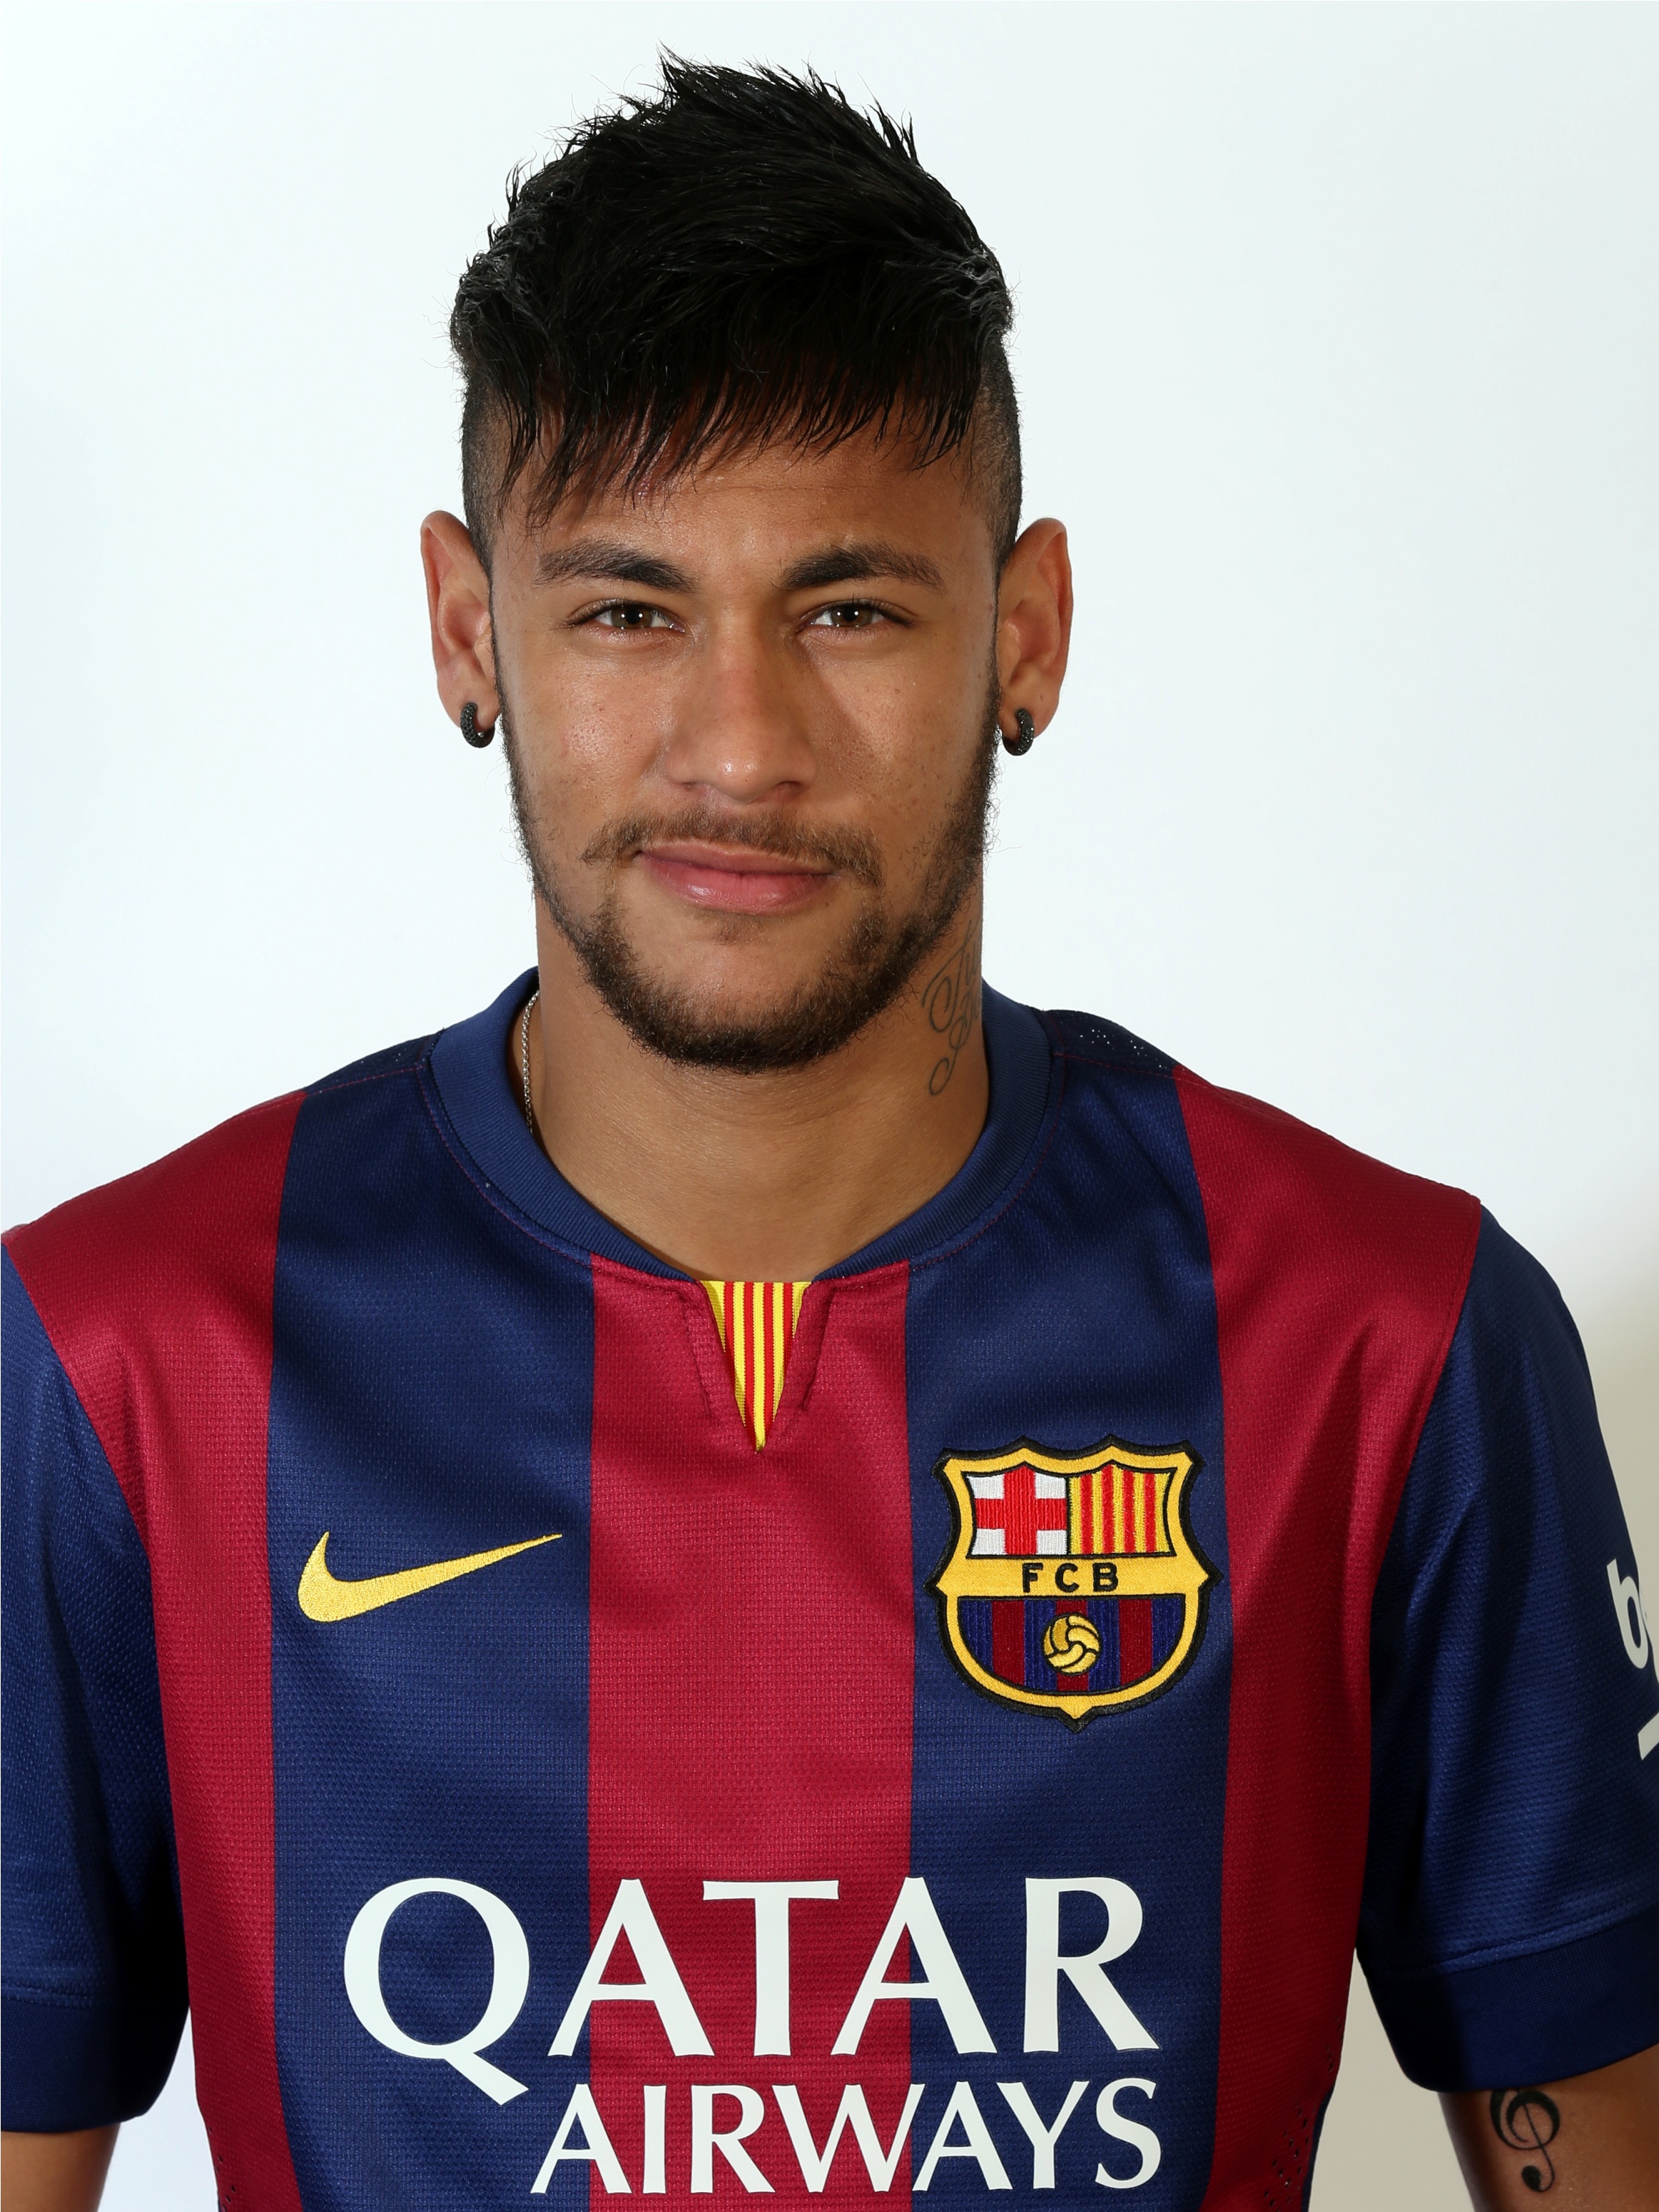  Neymar Jr Short Profile And Photo Collection 